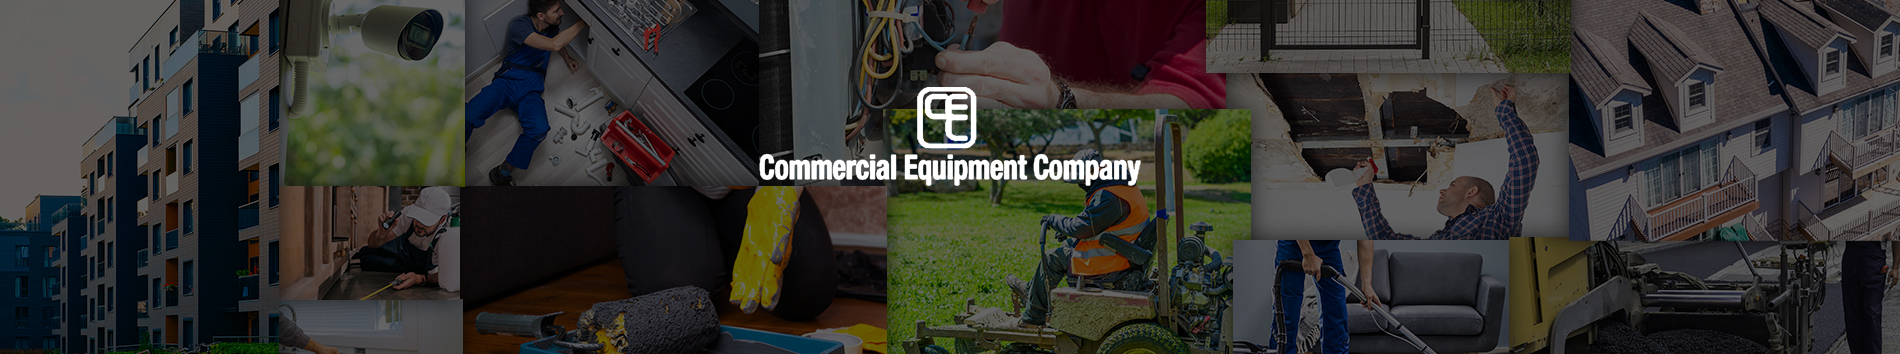 Commercial Equipment Company